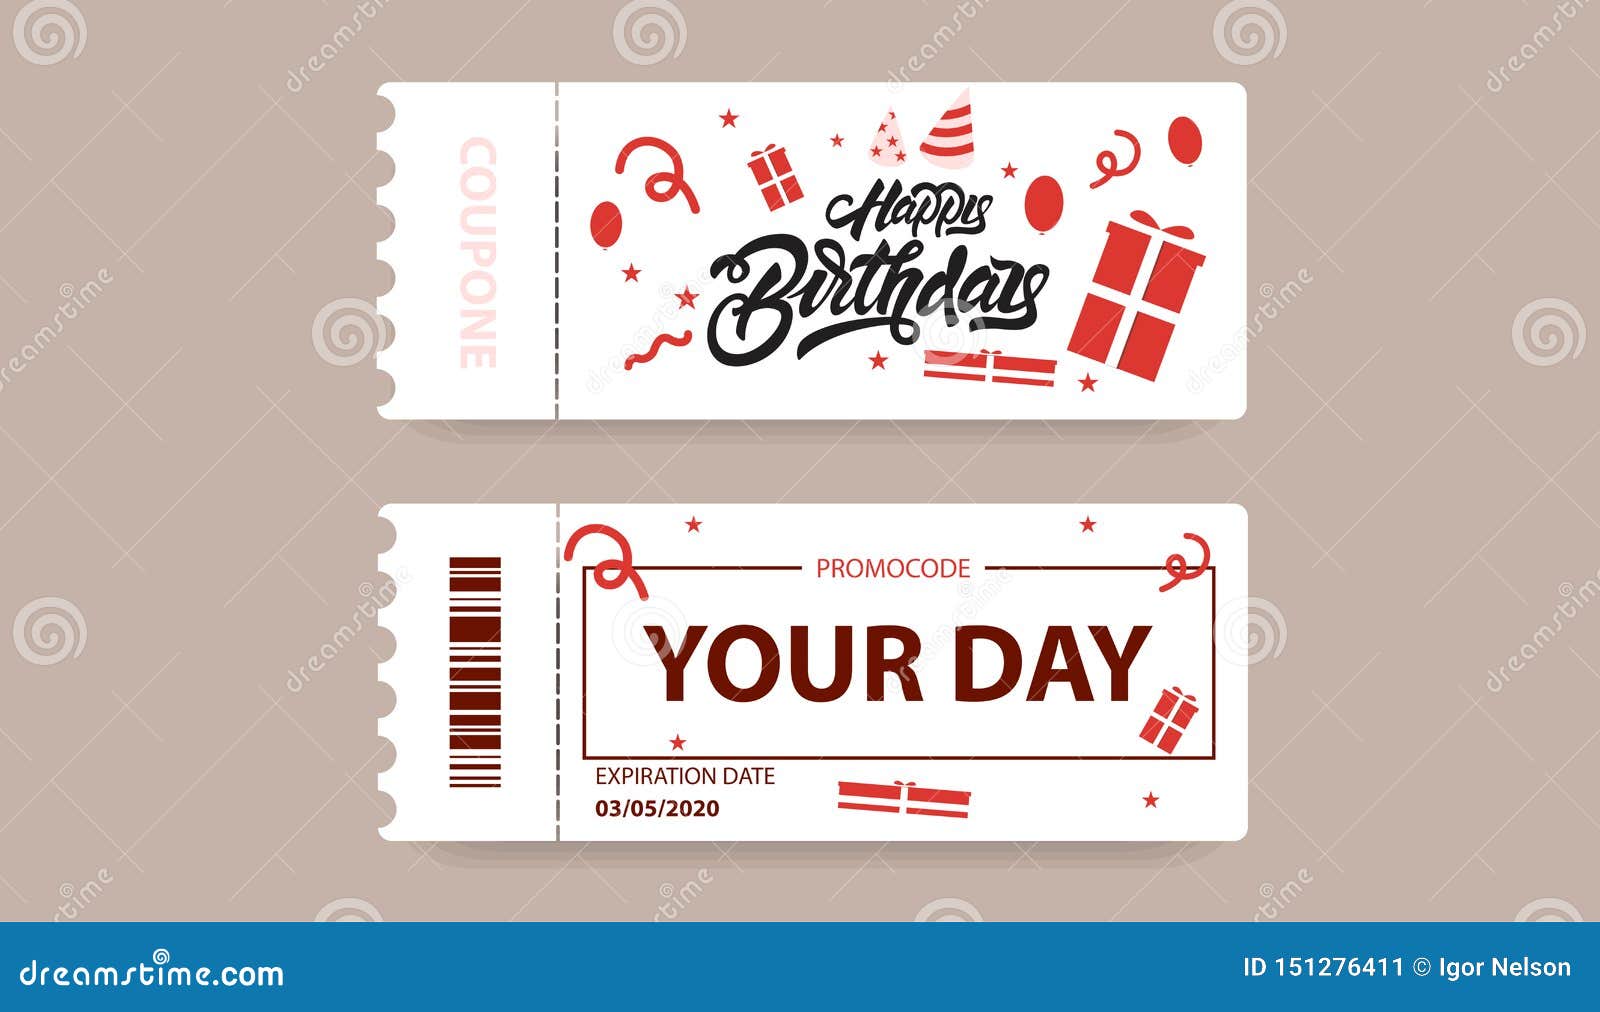 Gift Card With Coupon Code. Happy Birthday Coupon